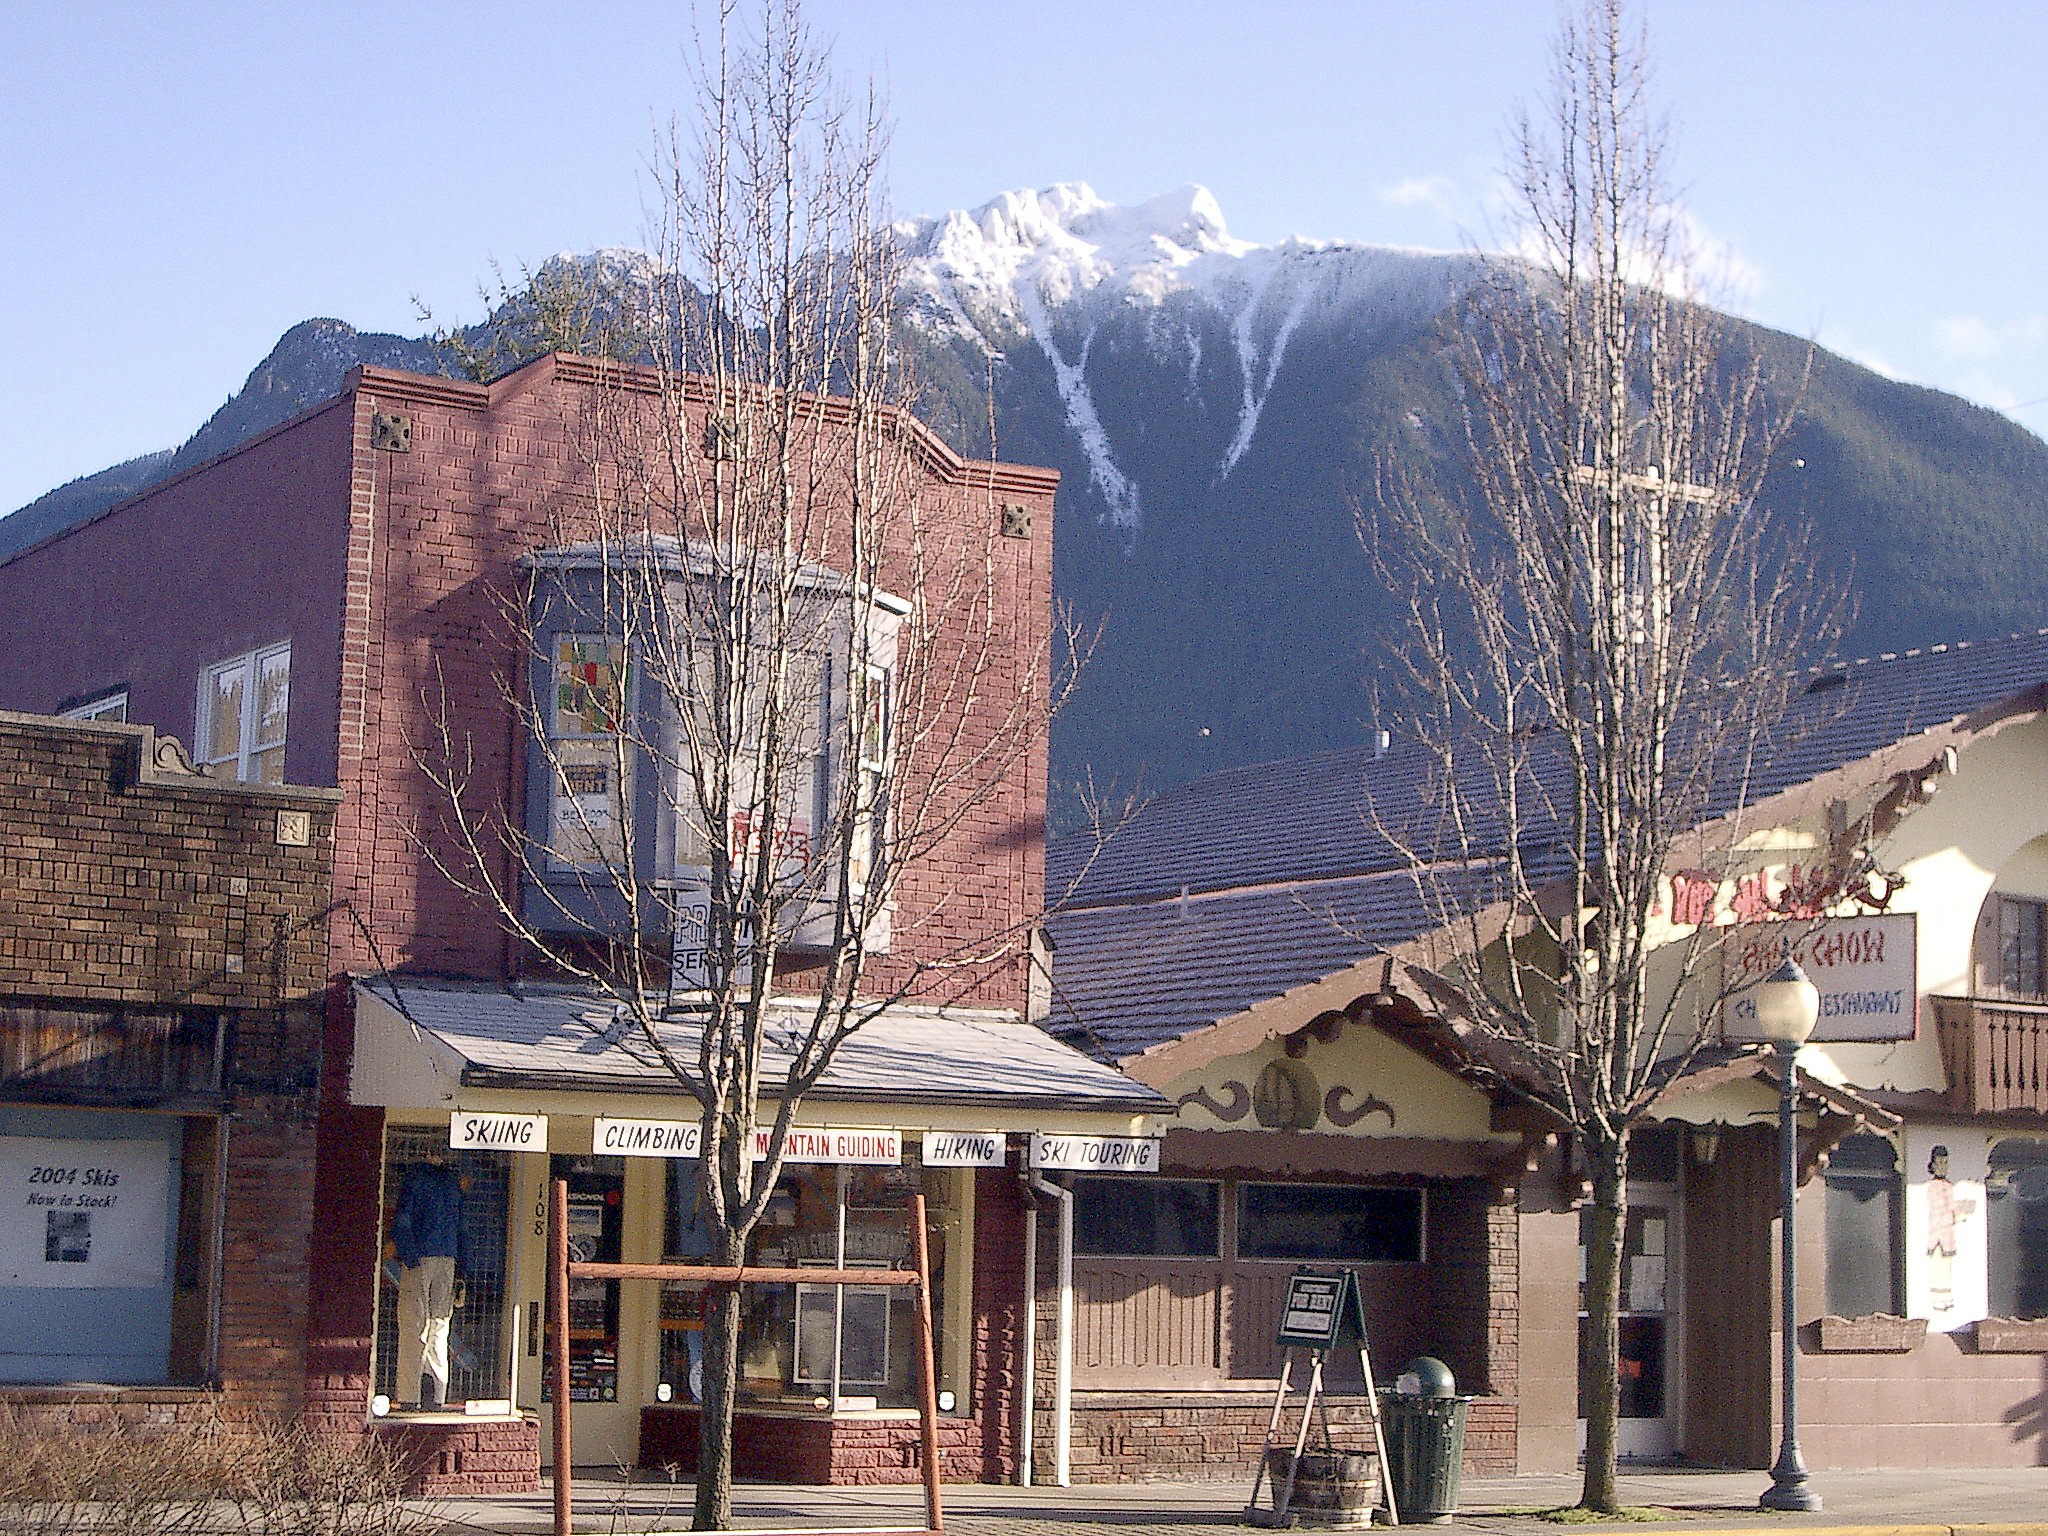 Courtesy PhotoMountains are what drew Pro Ski and Mountain Service owner Martin Volken to locate his shop in North Bend